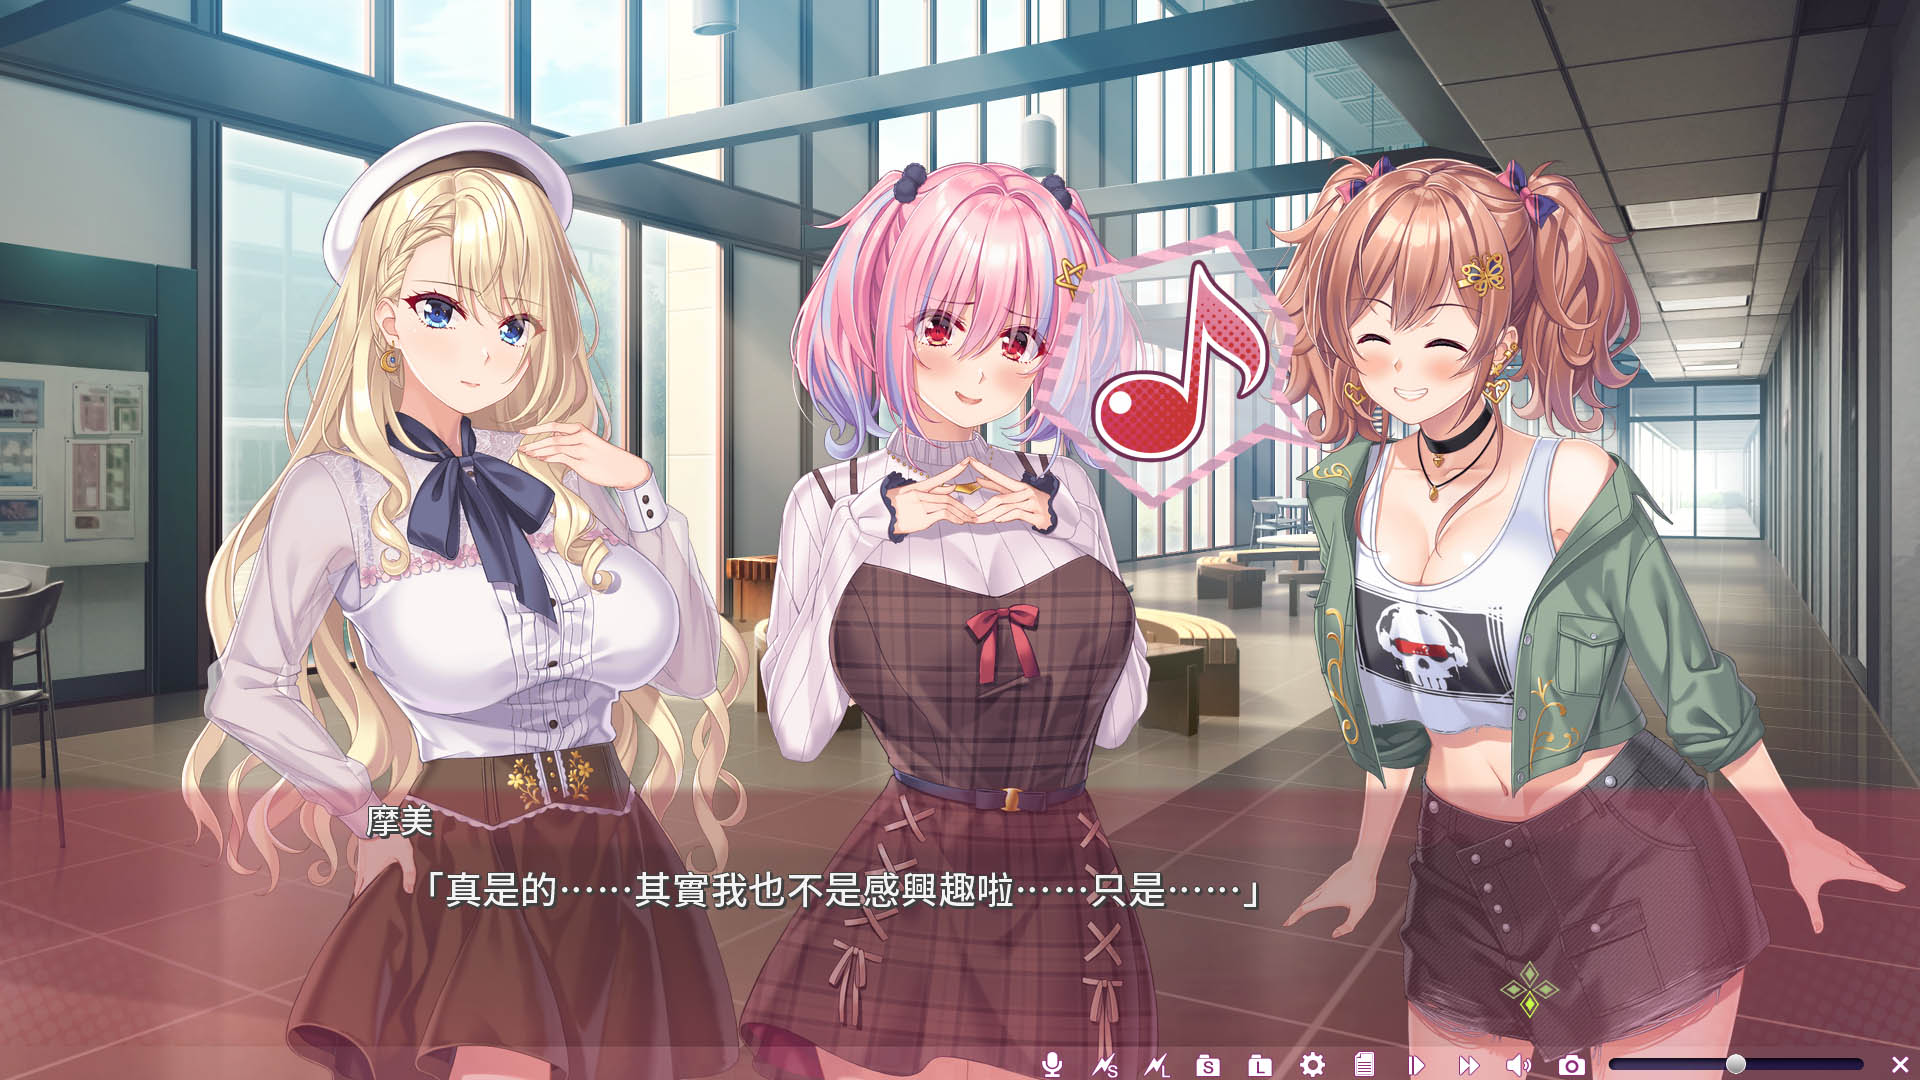 18+ DLC - Succubus Sessions: Mami Mamiya’s Sweet Slice of Hell (Traditional Chinese) Patch for Steam - Visual Novel - 4 - Select